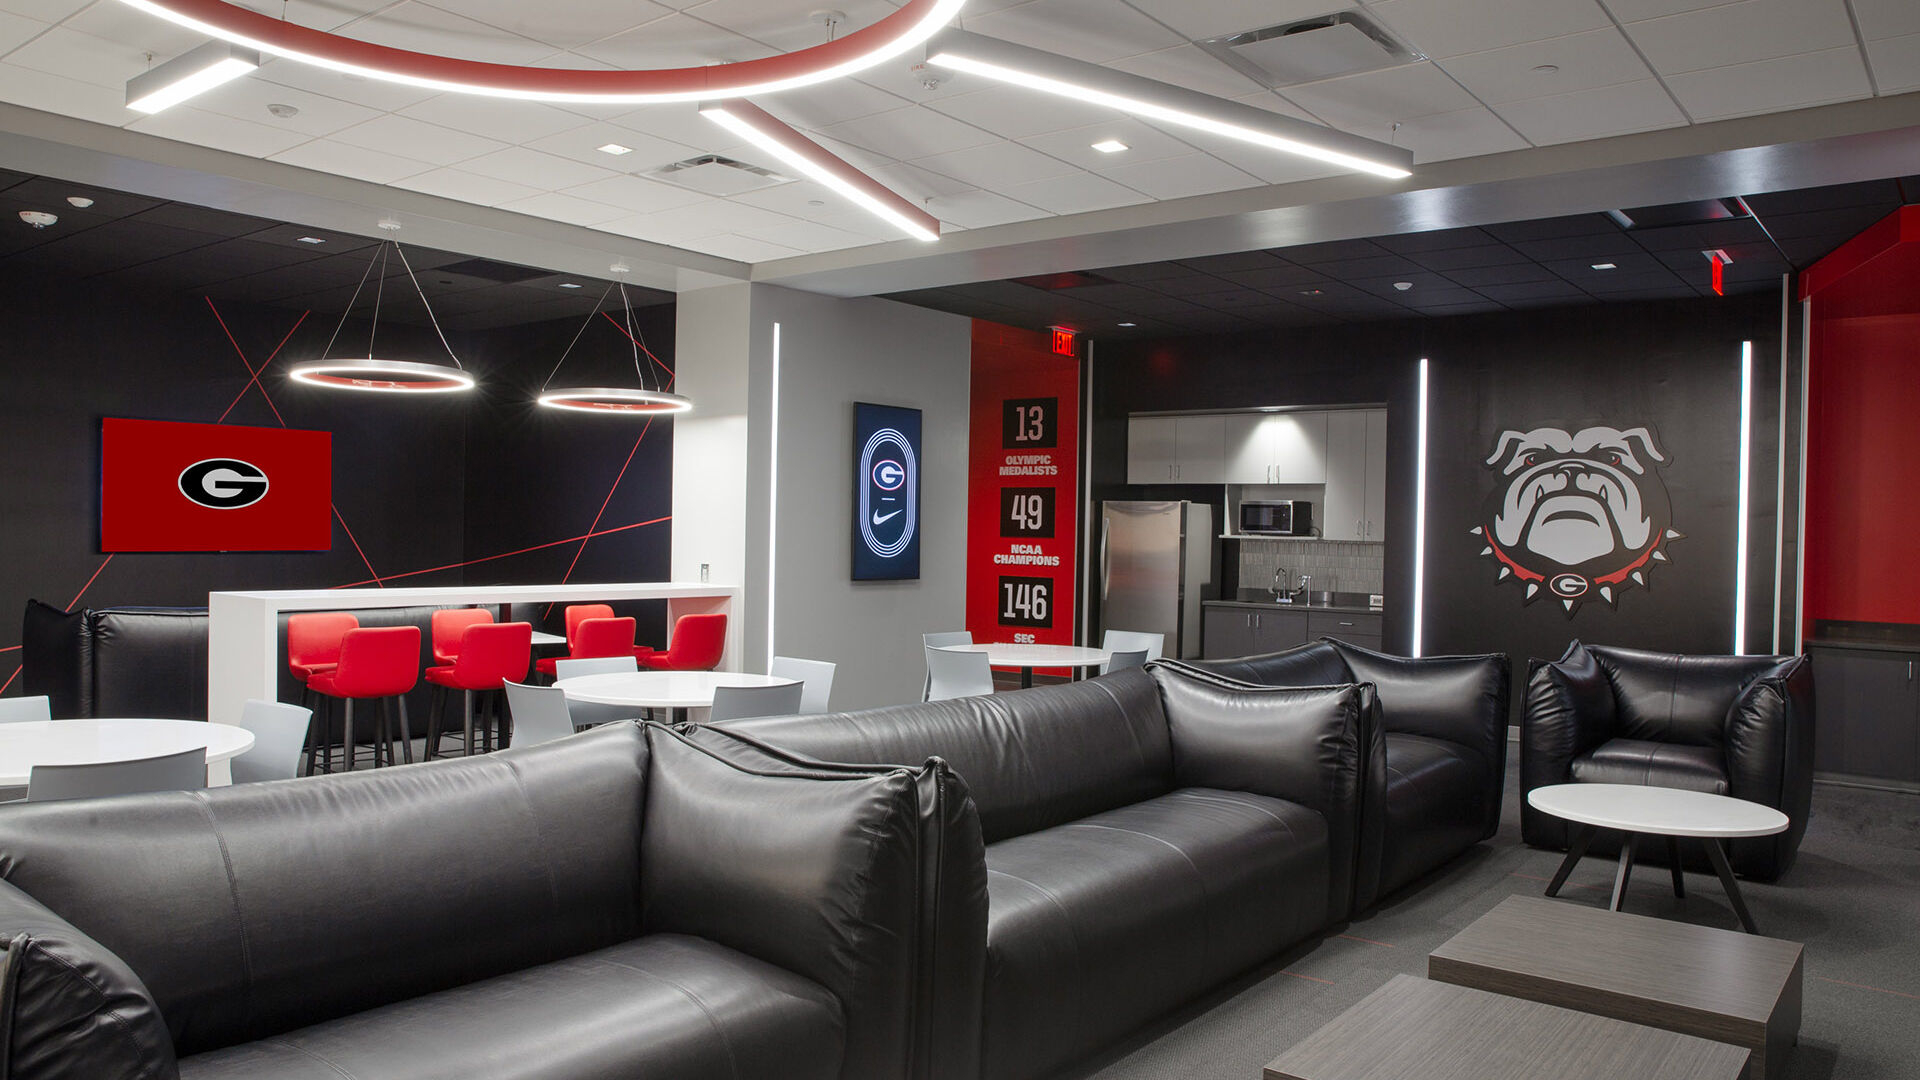 University of Georgia Track and Field Players' lounge